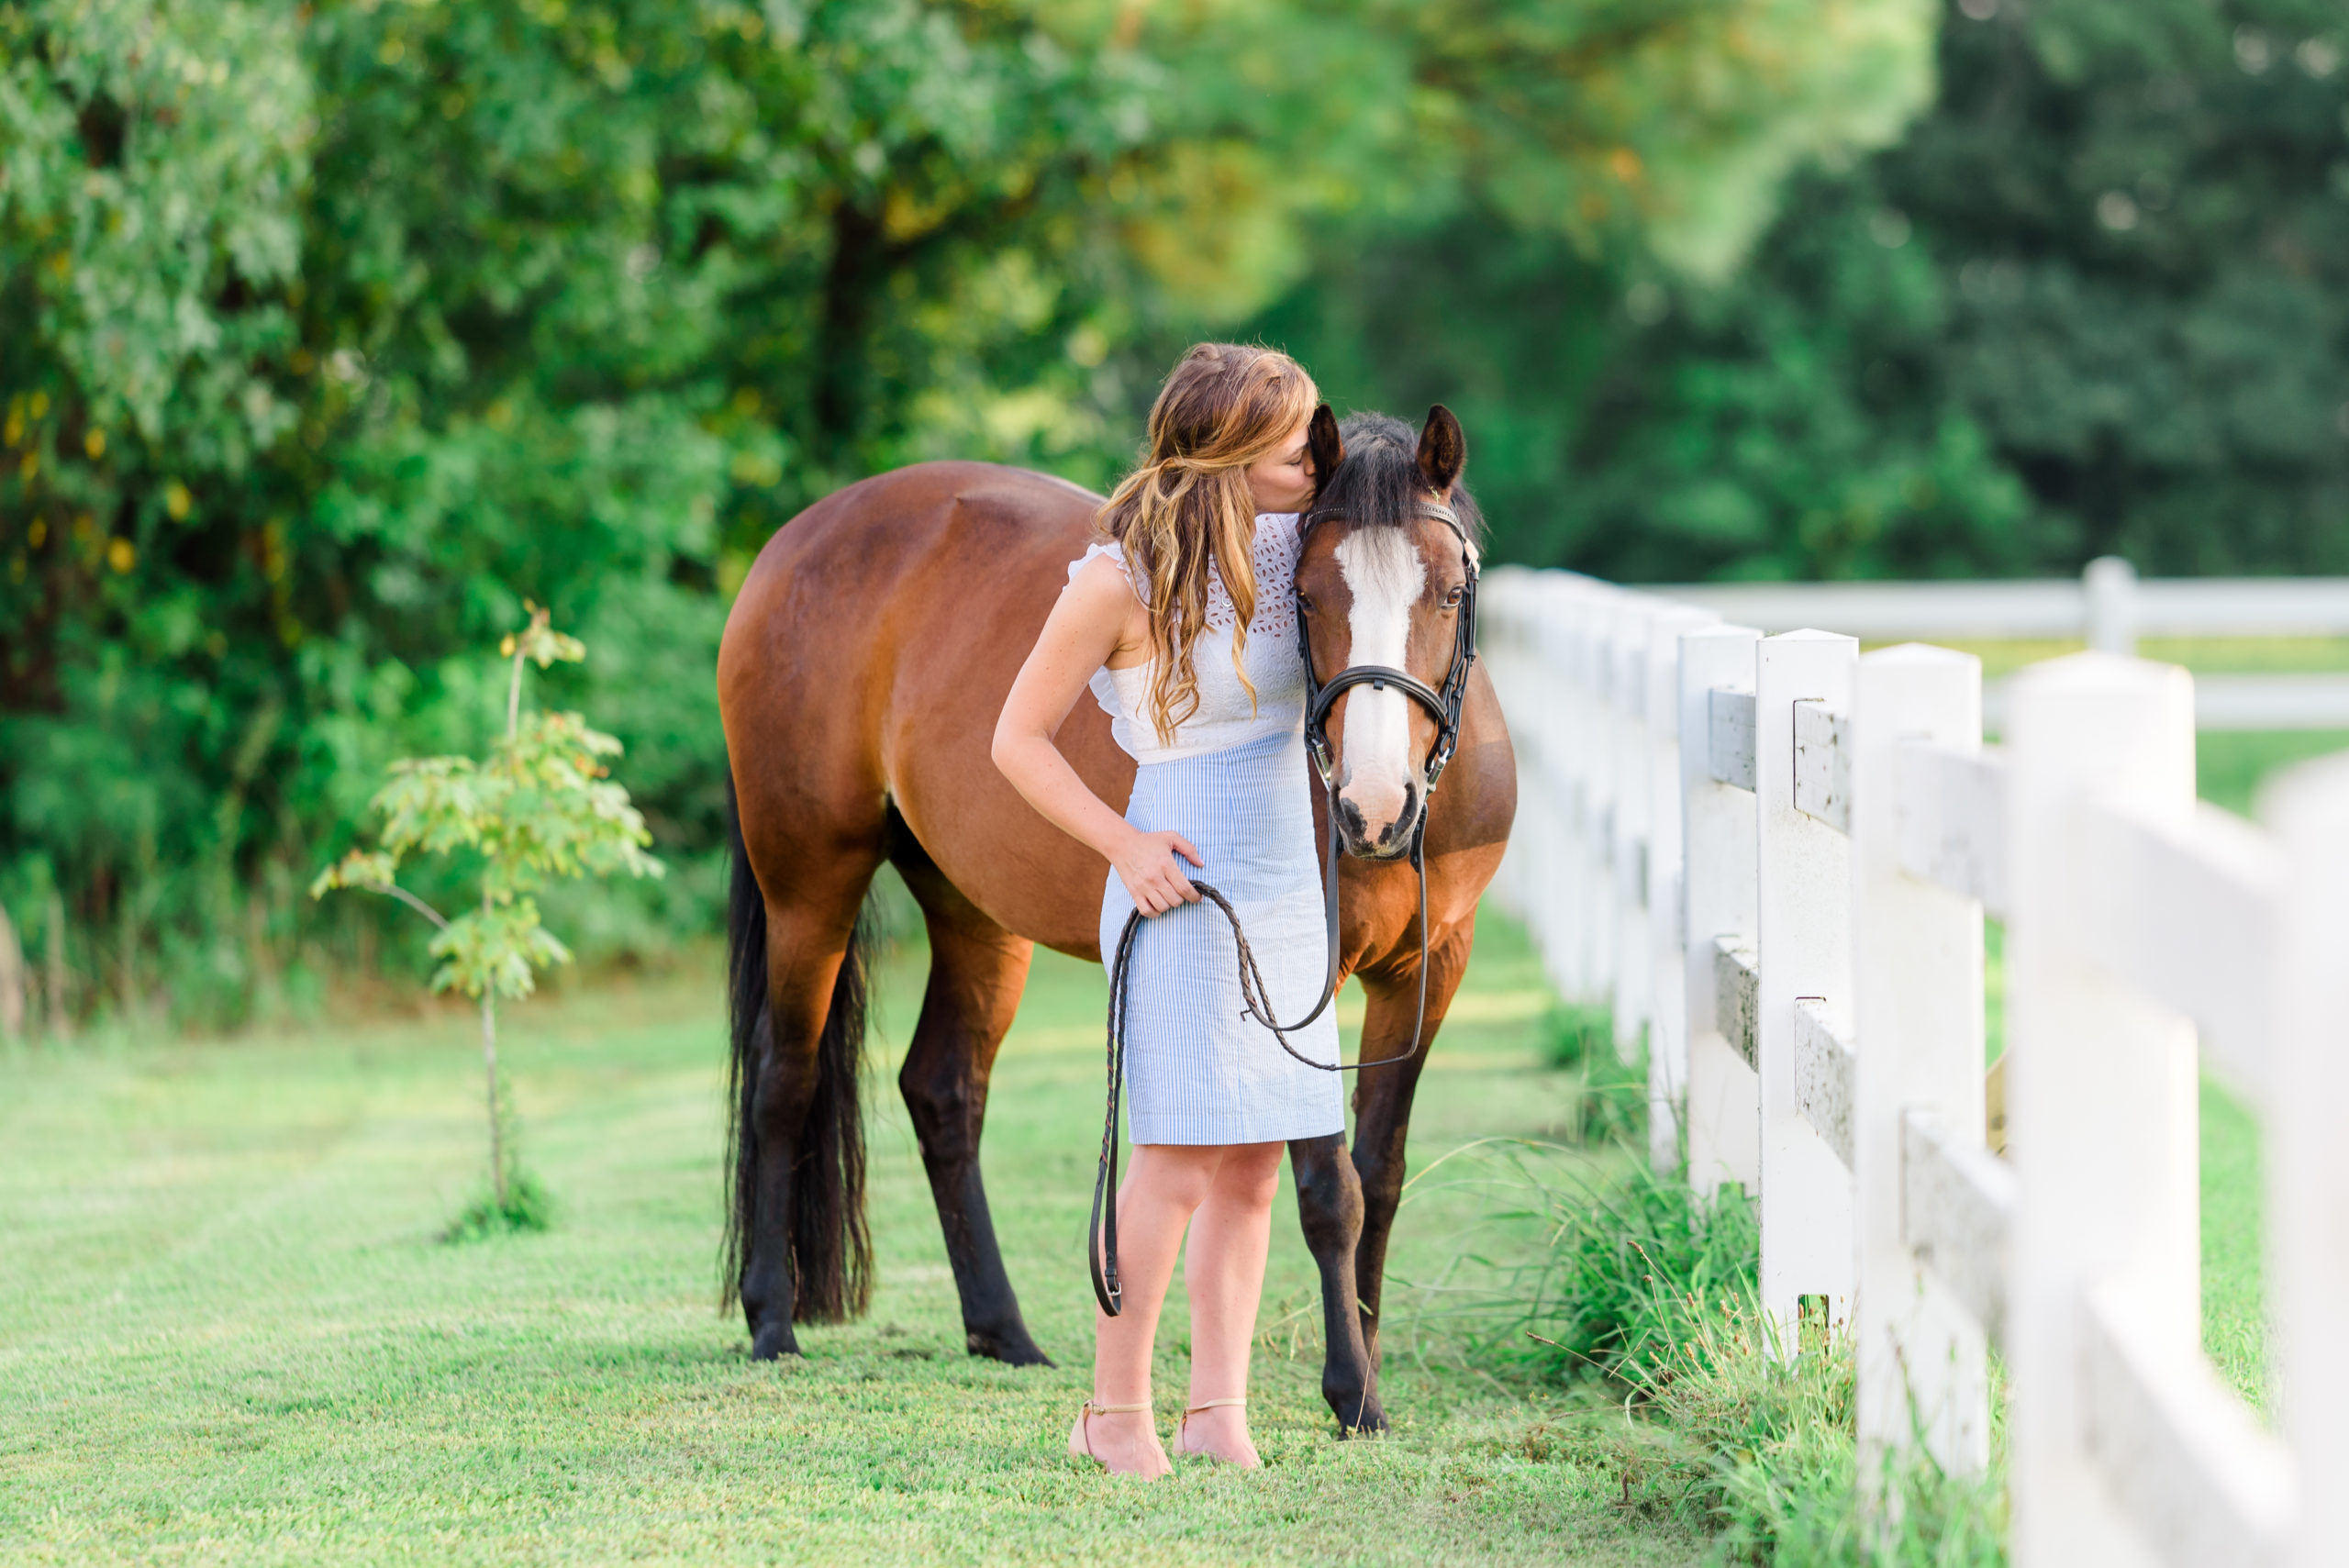 specializing in equine photography